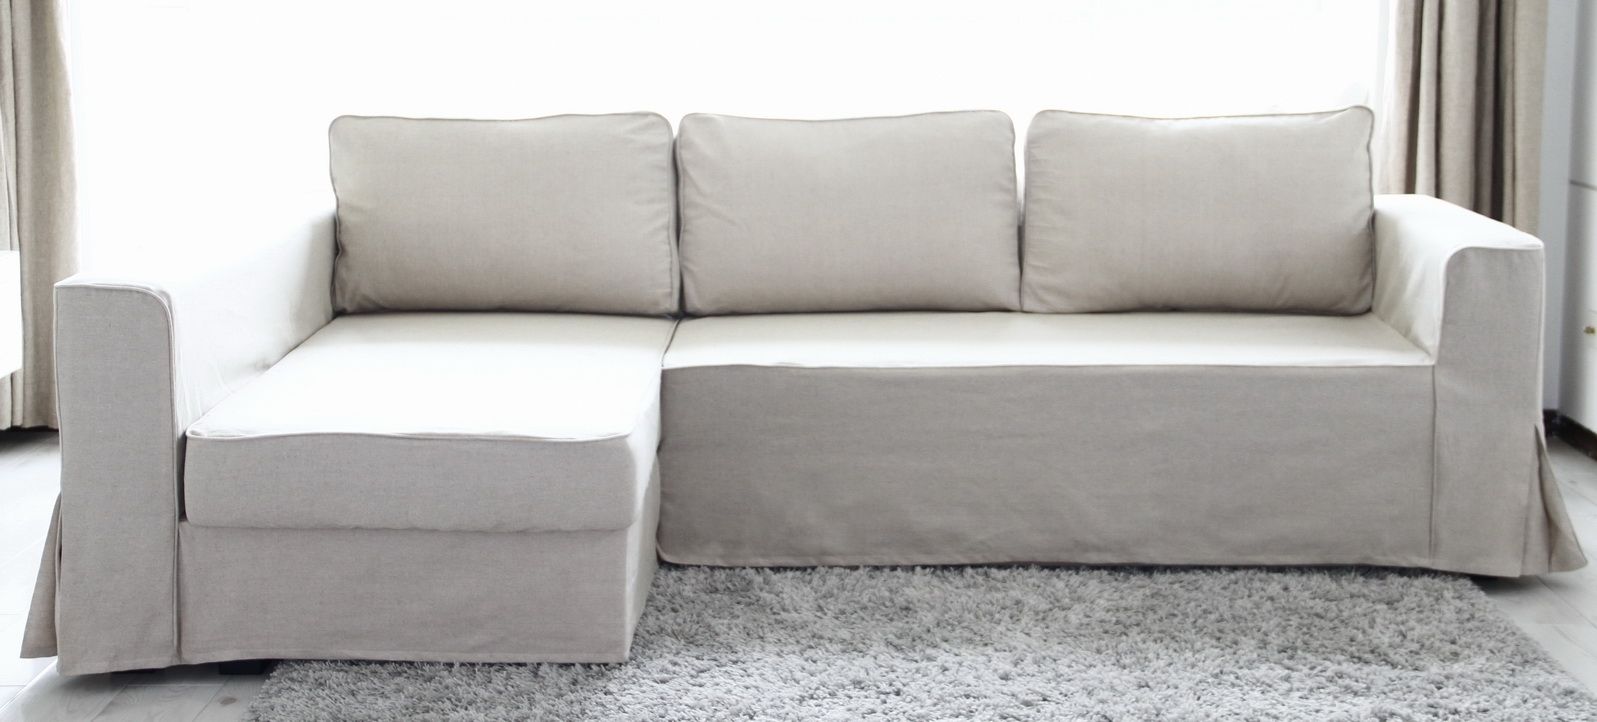 Loose Fit Linen Manstad Sofa Slipcovers Now Available Regarding Manstad Sofas (Photo 6141 of 7825)